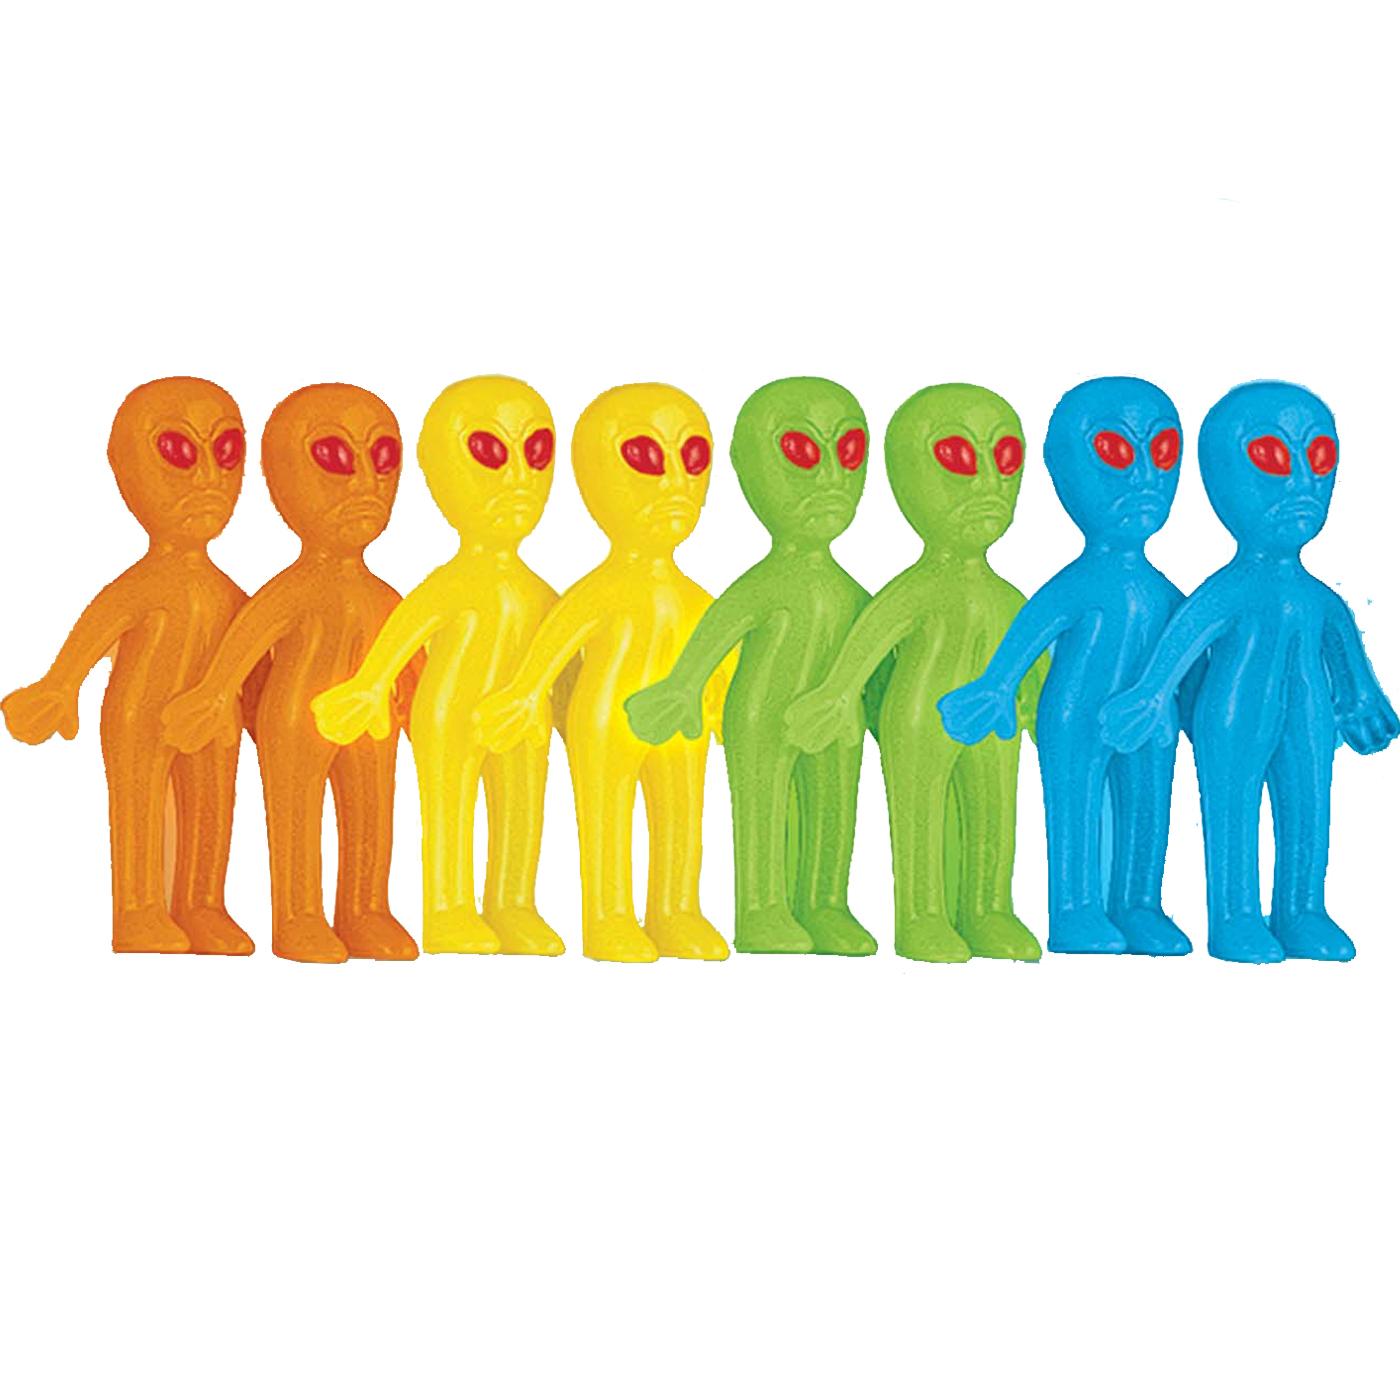 Blast Off Birthday Glow In Dark Aliens Favors 8pcs Party Favors - Party Centre